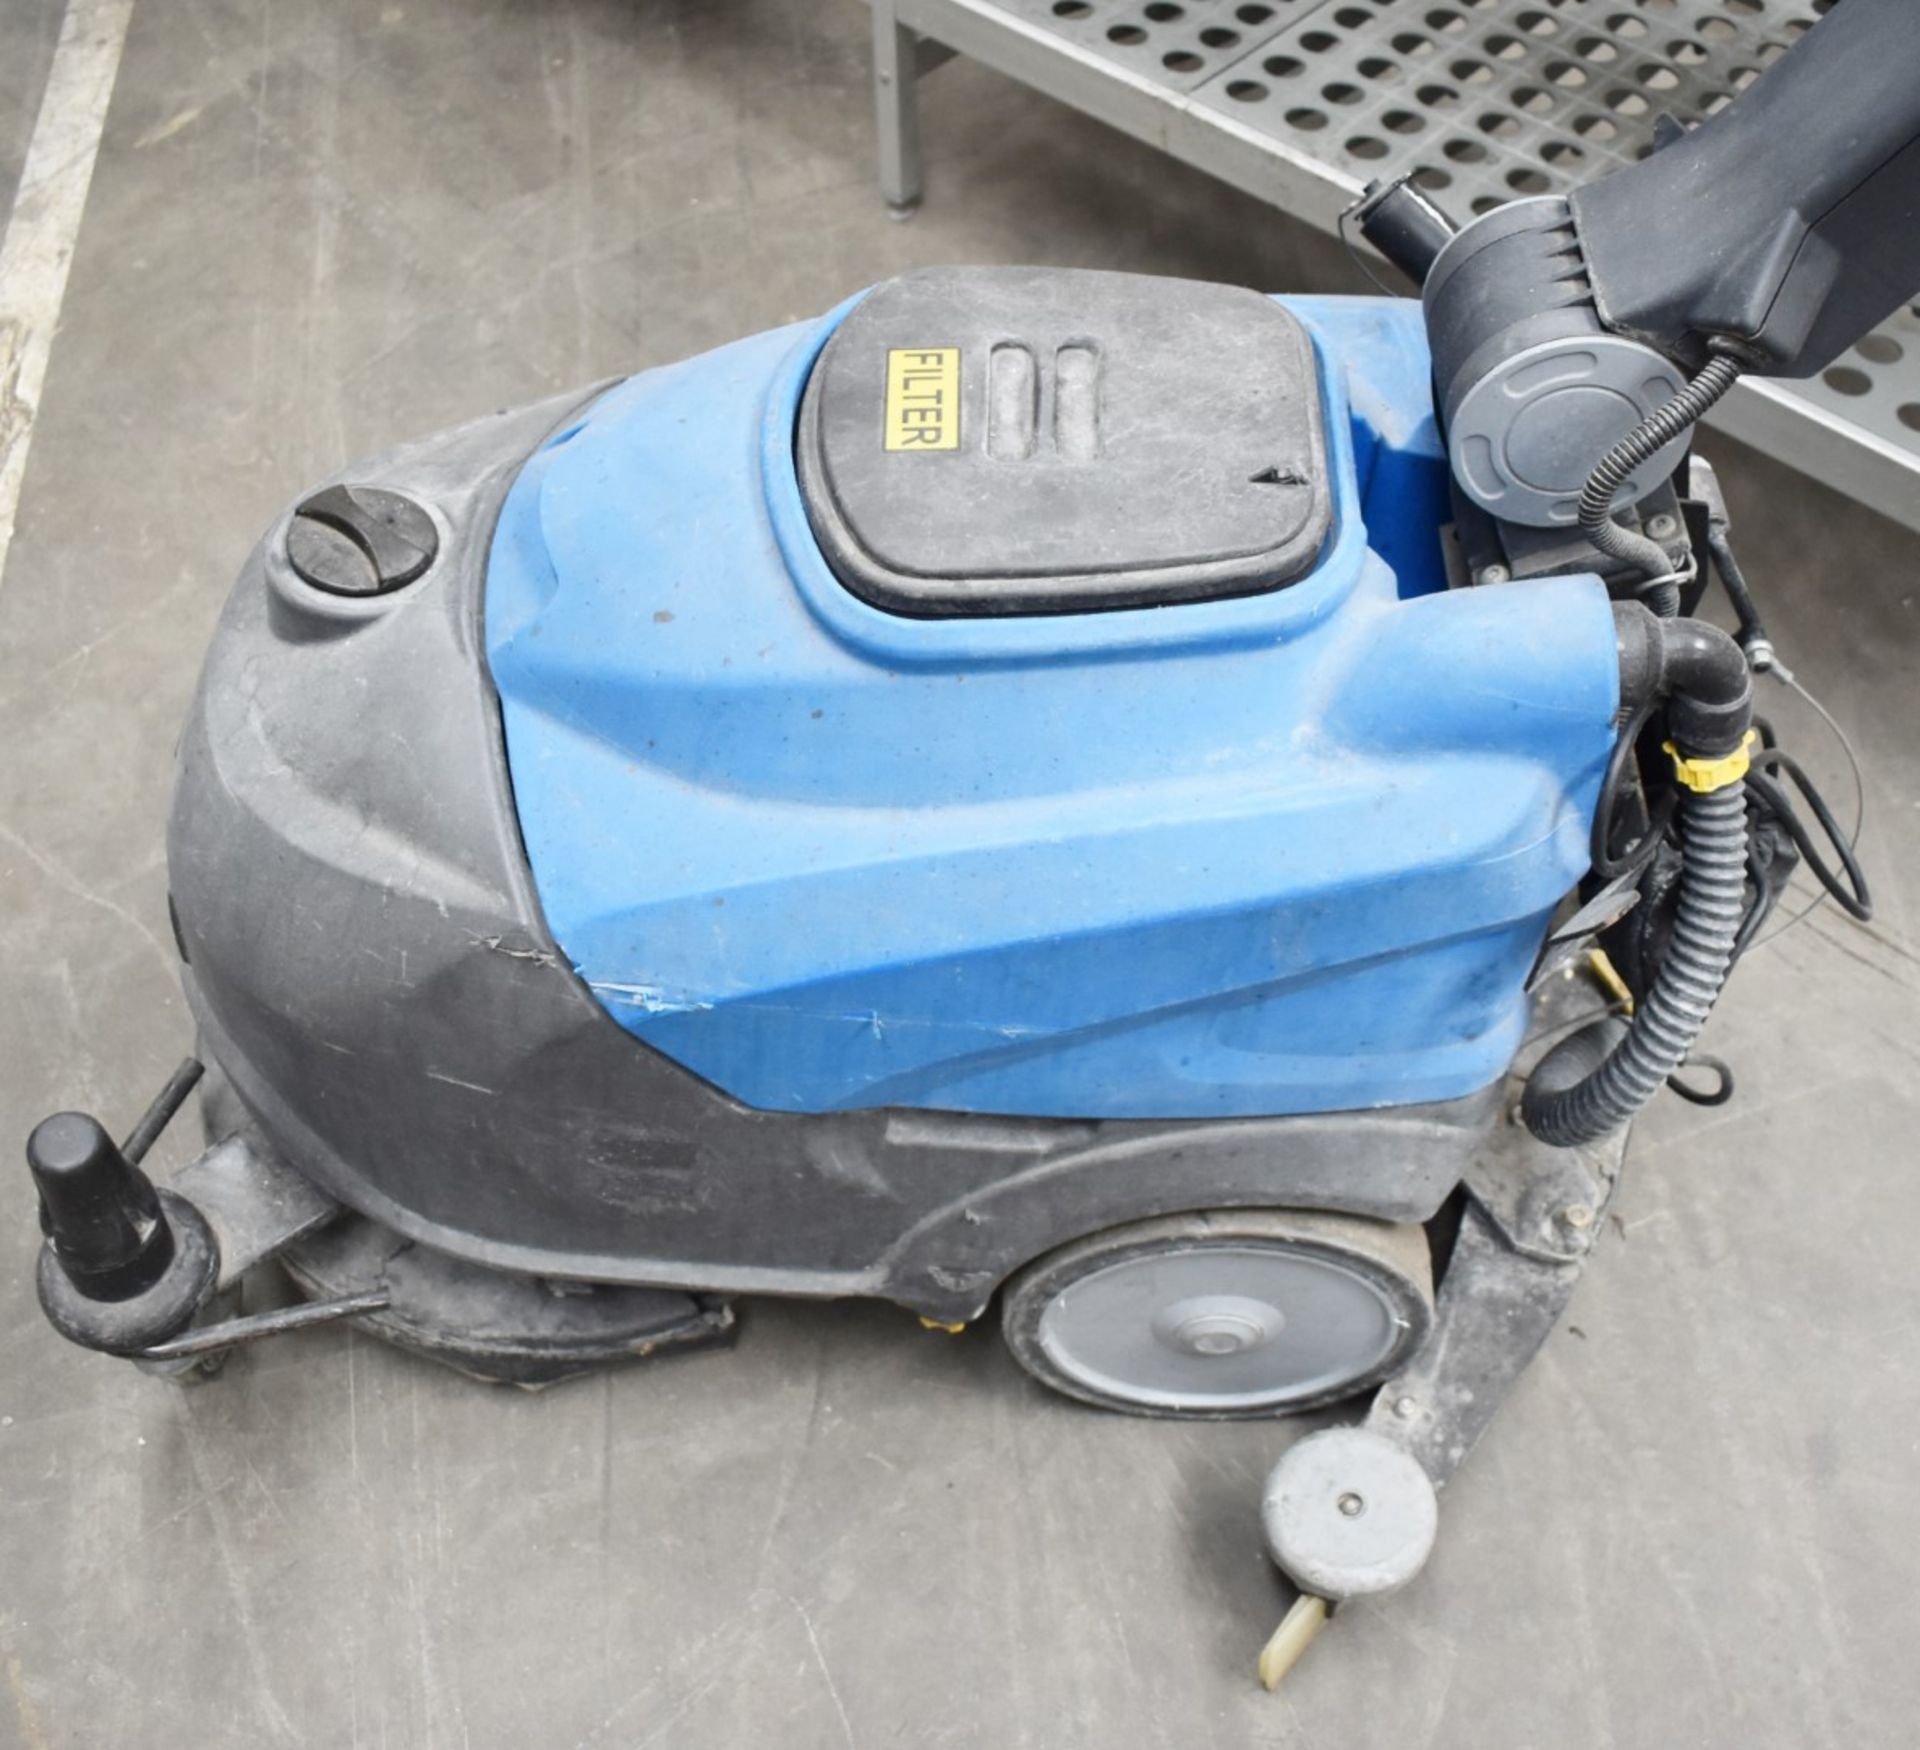 1 x ITC CT30 Walk Behind Battery Powered Floor Cleaner Scrubber/Dryer - Recently Removed From - Image 12 of 12